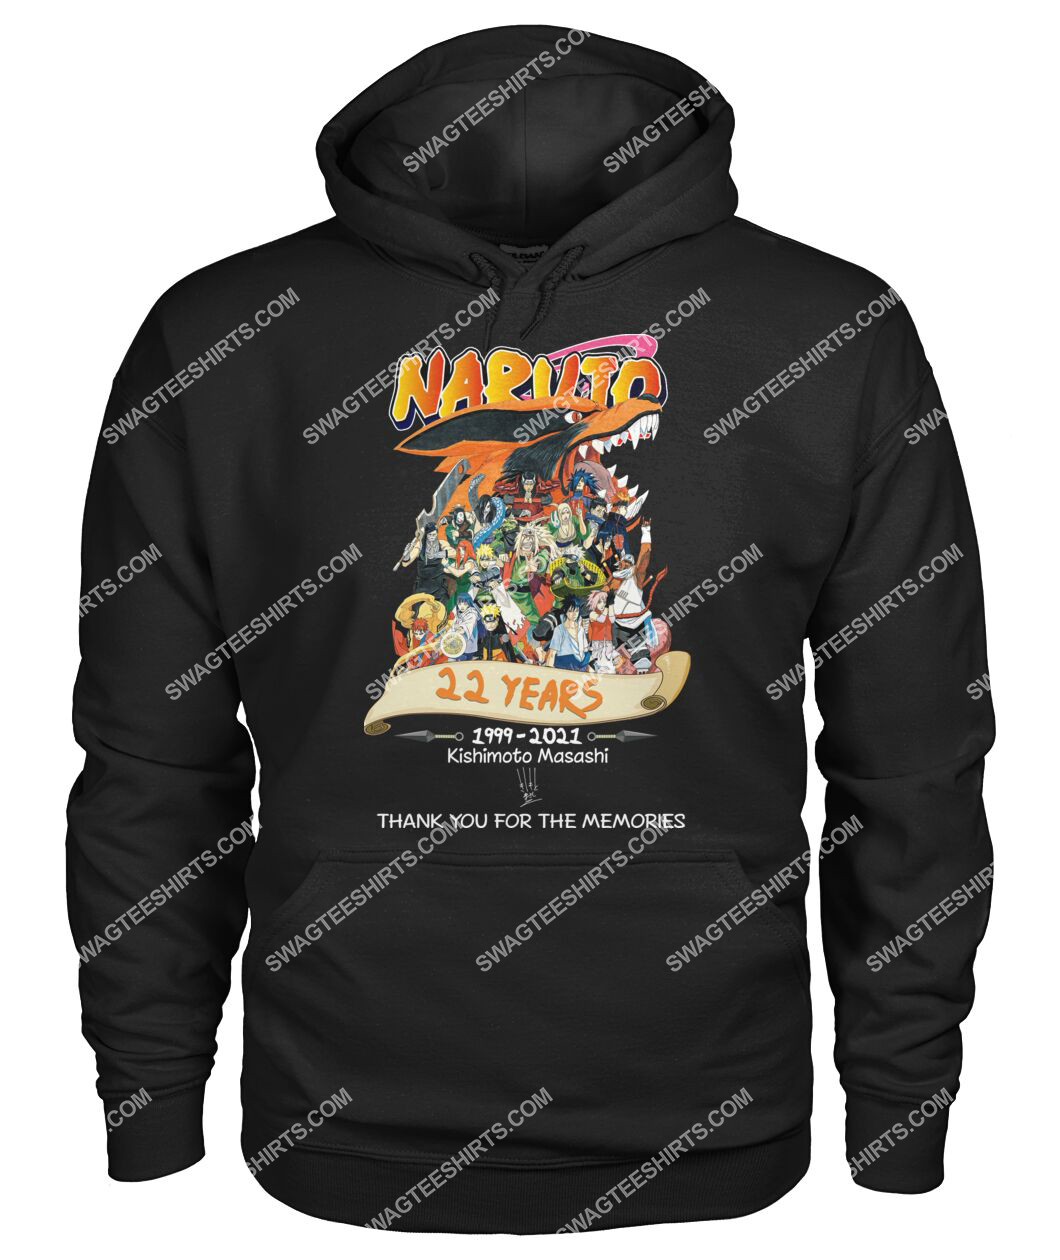 naruto 22 years thank you for memories signatures hoodie 1